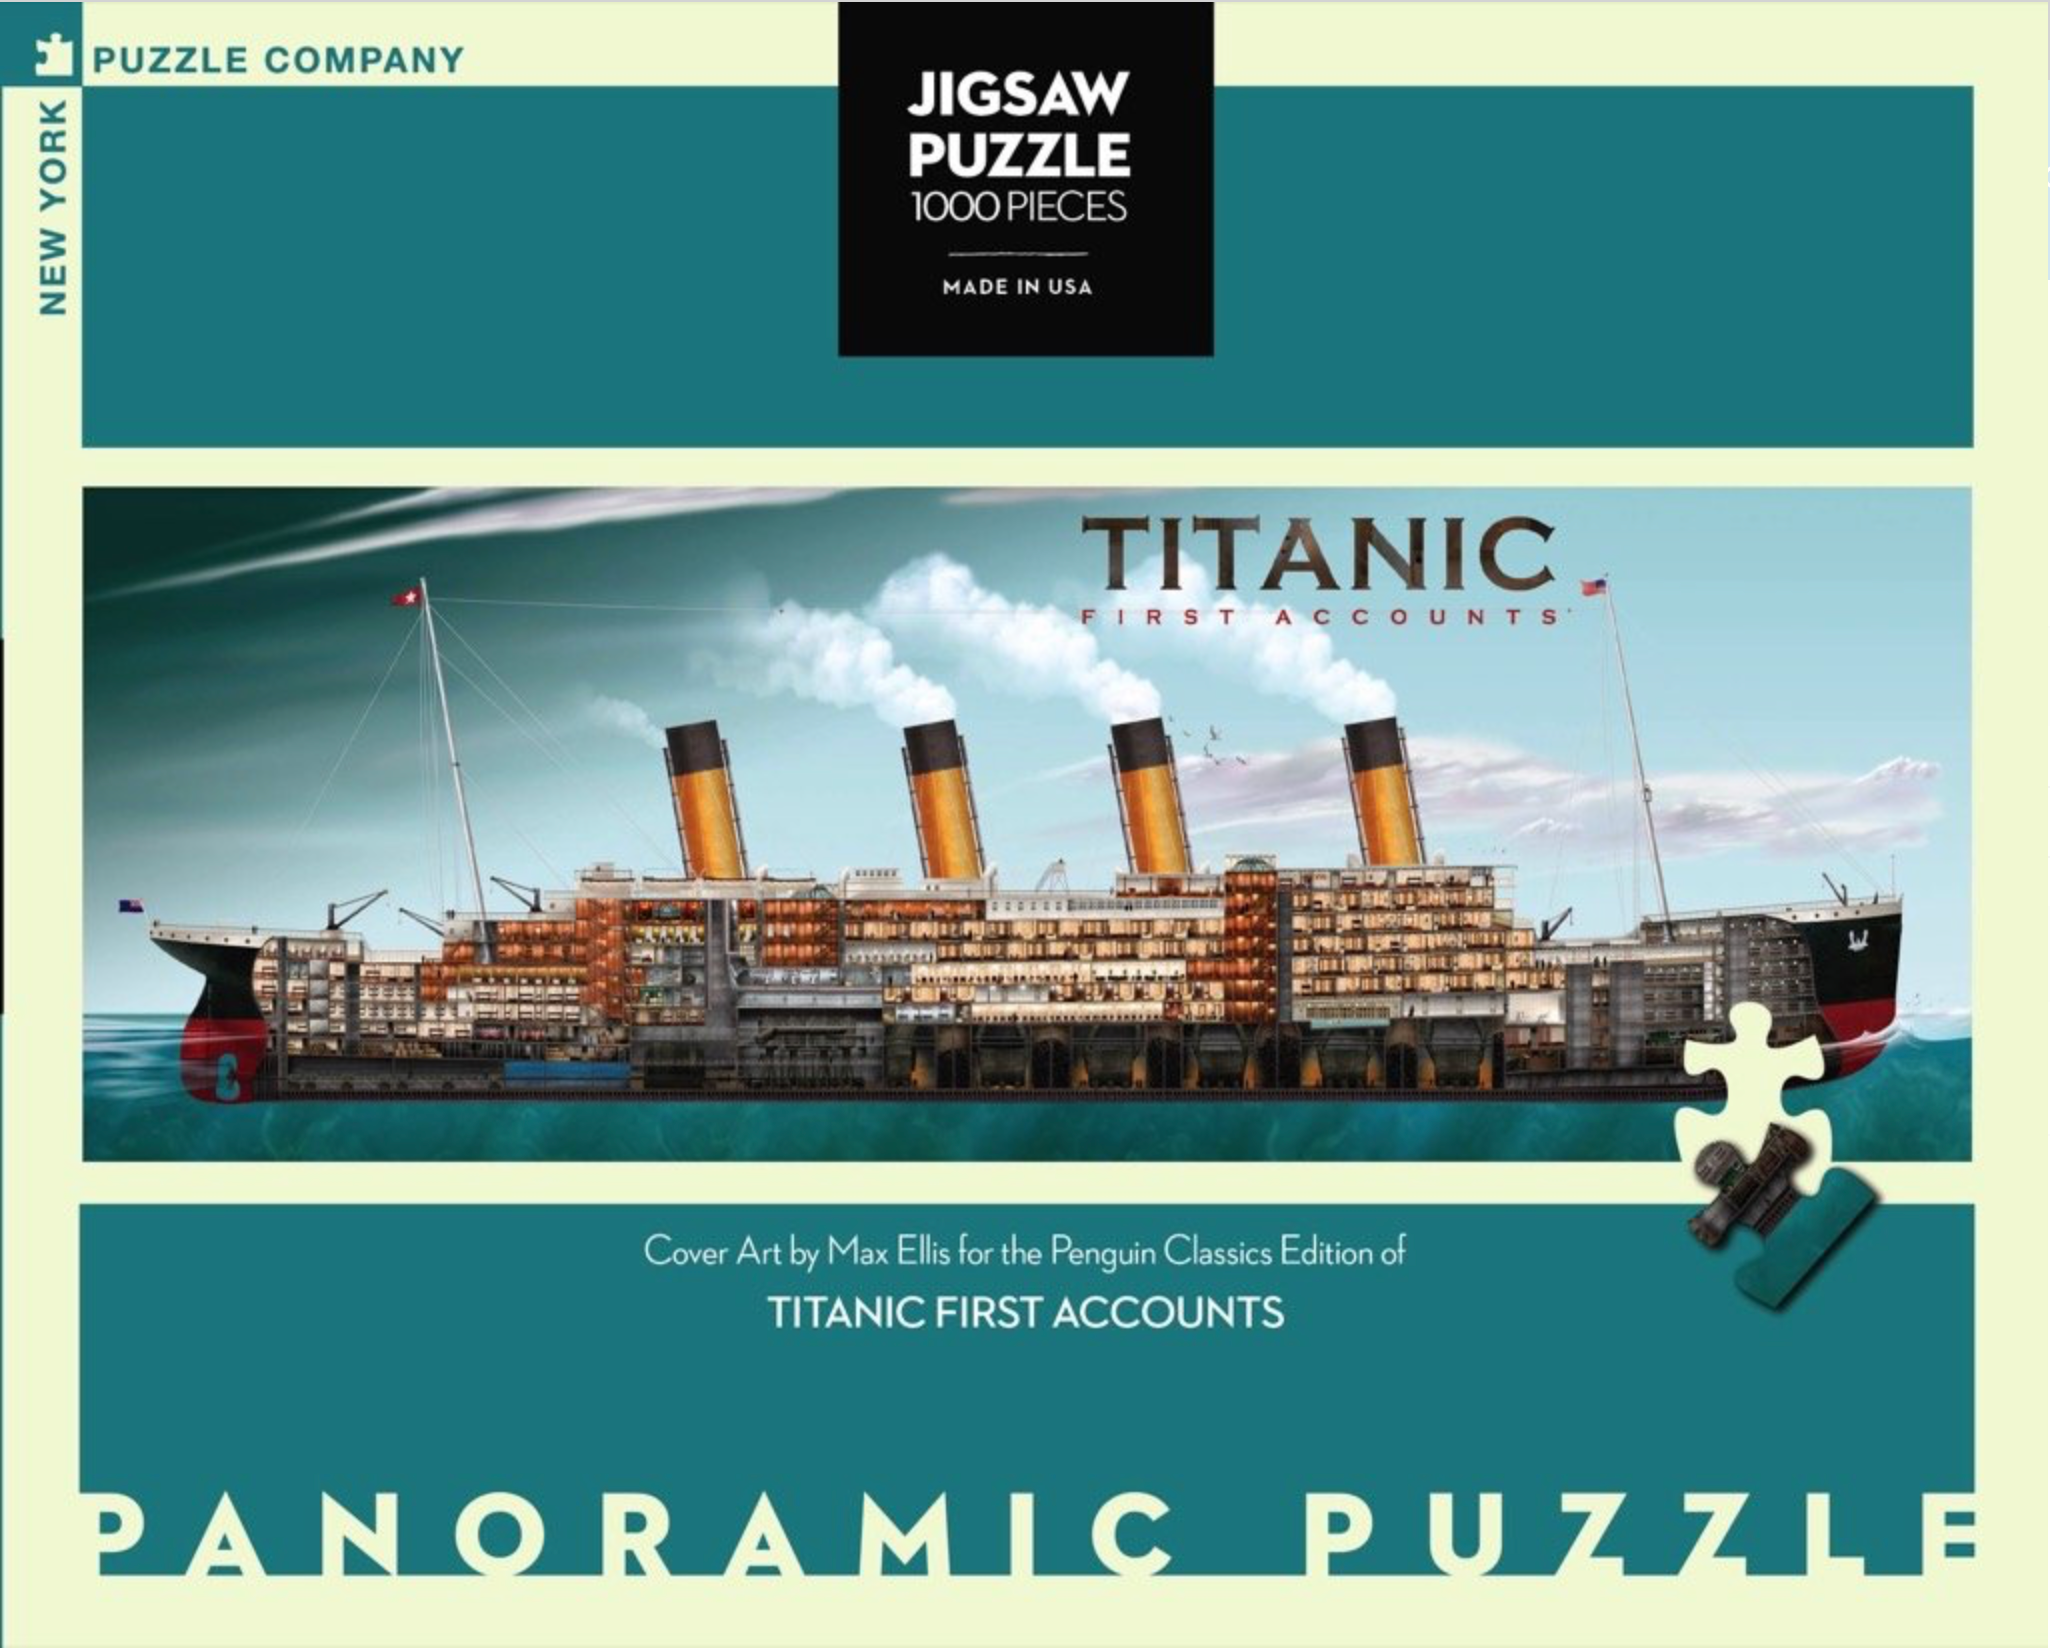 Titanic First Accounts (1000 pc puzzle)